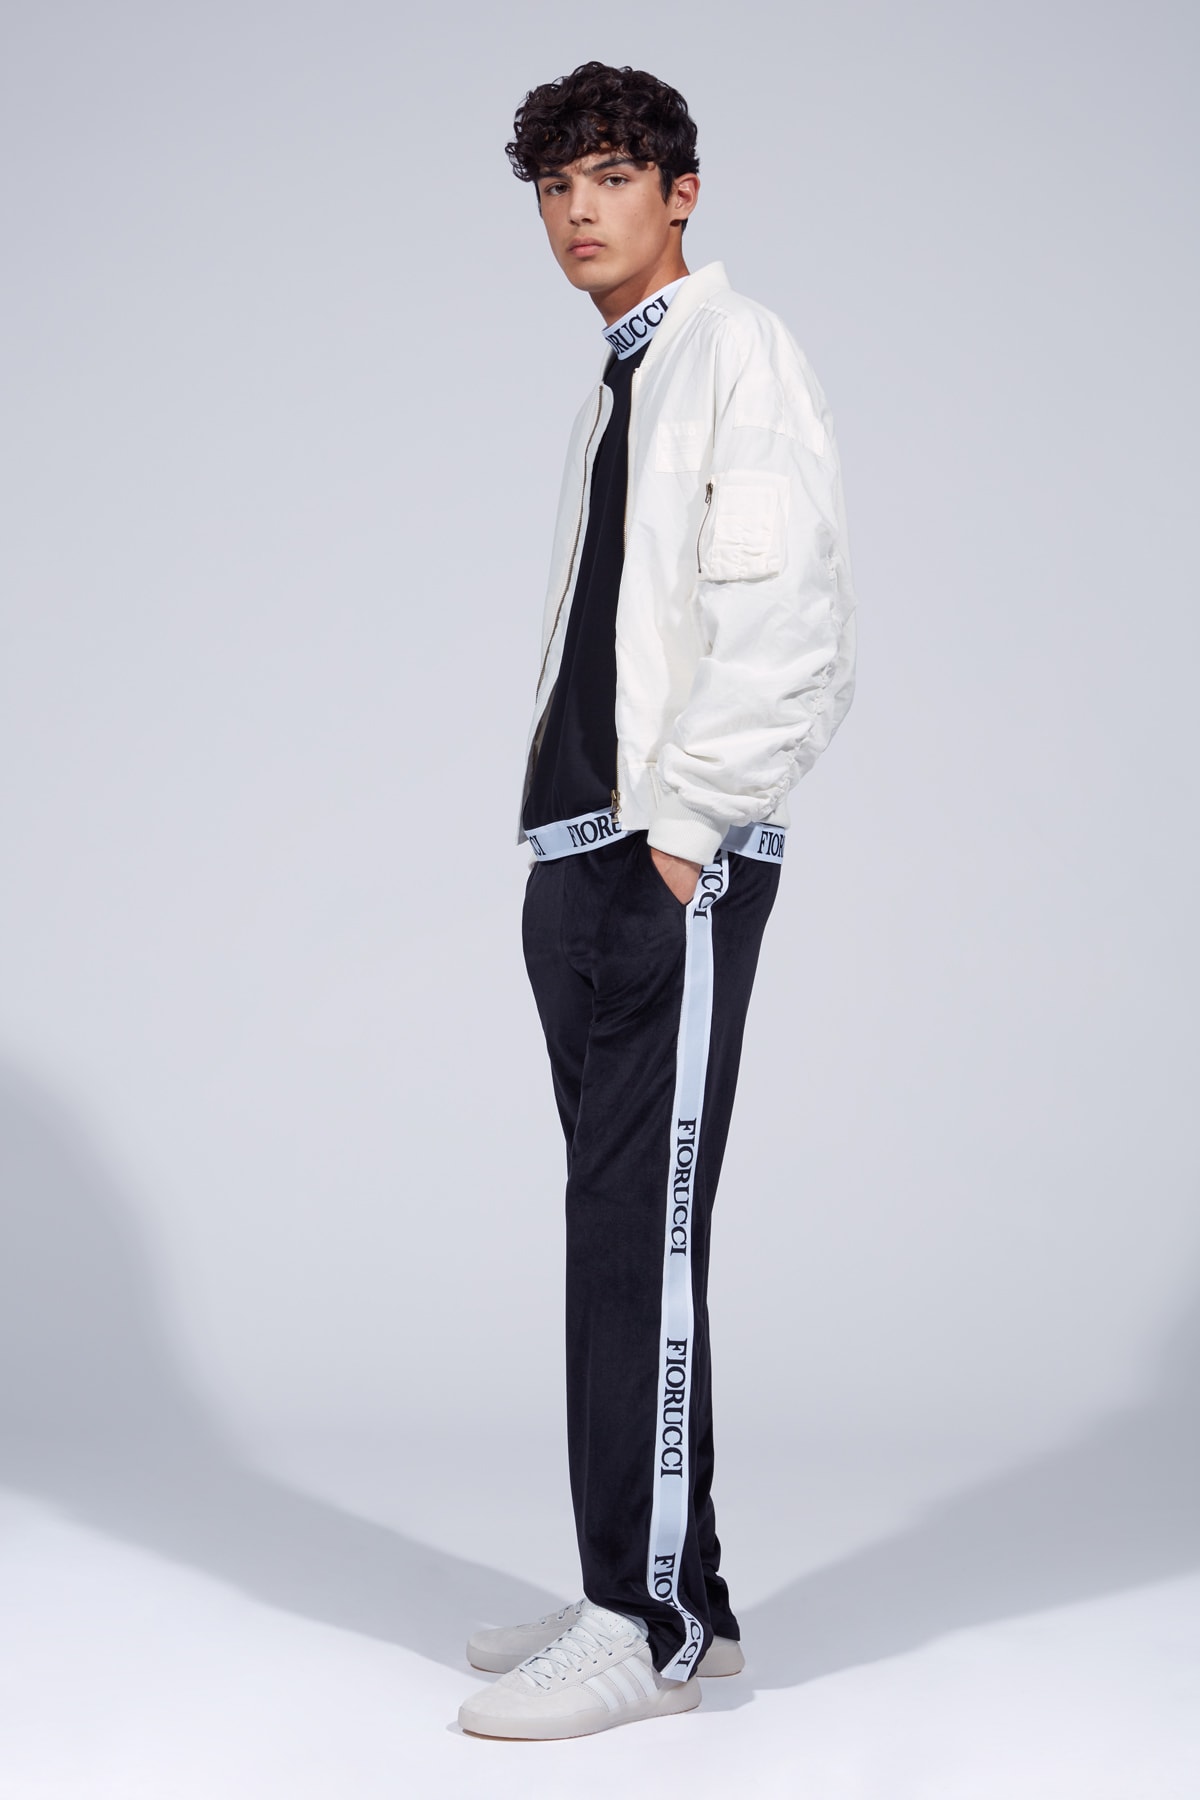 Fiorucci Spring Summer 2019 Collection Lookbook Jacket White Shirt Pants Black